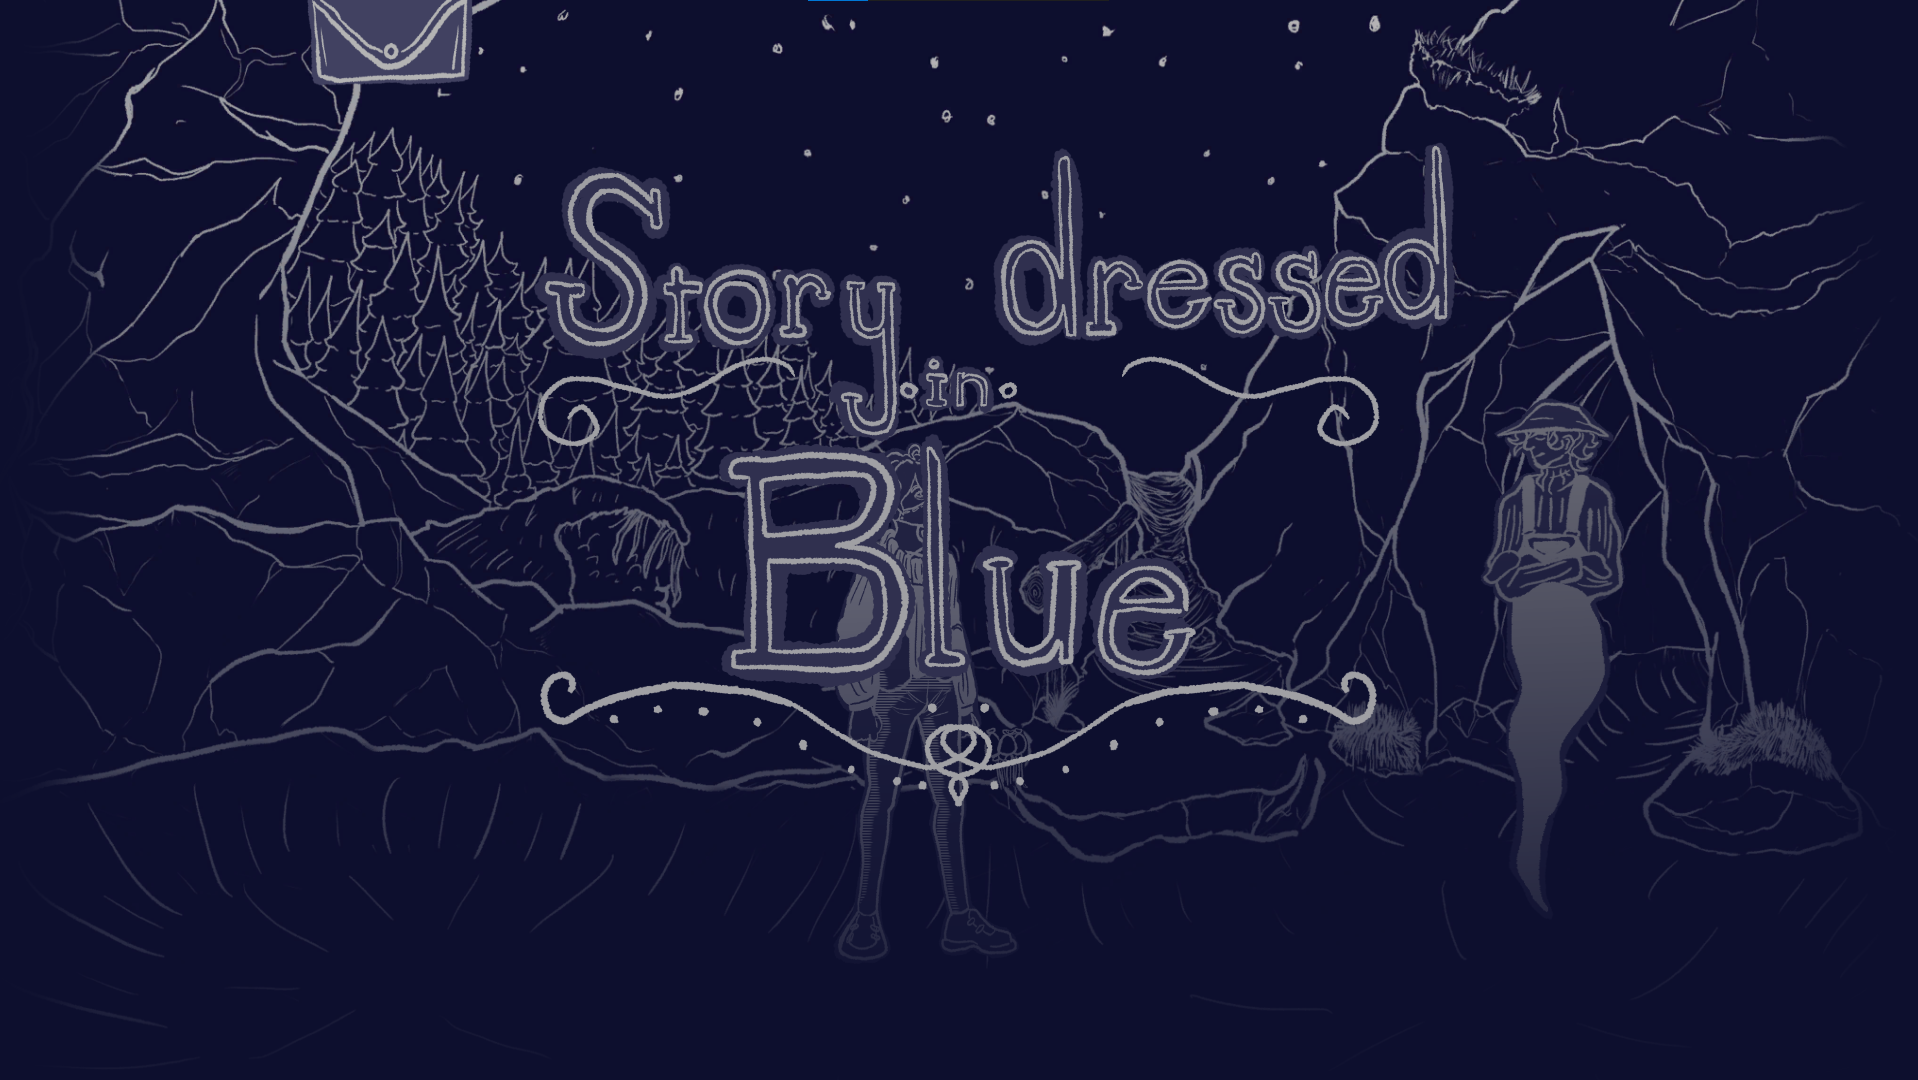 Story dressed in Blue